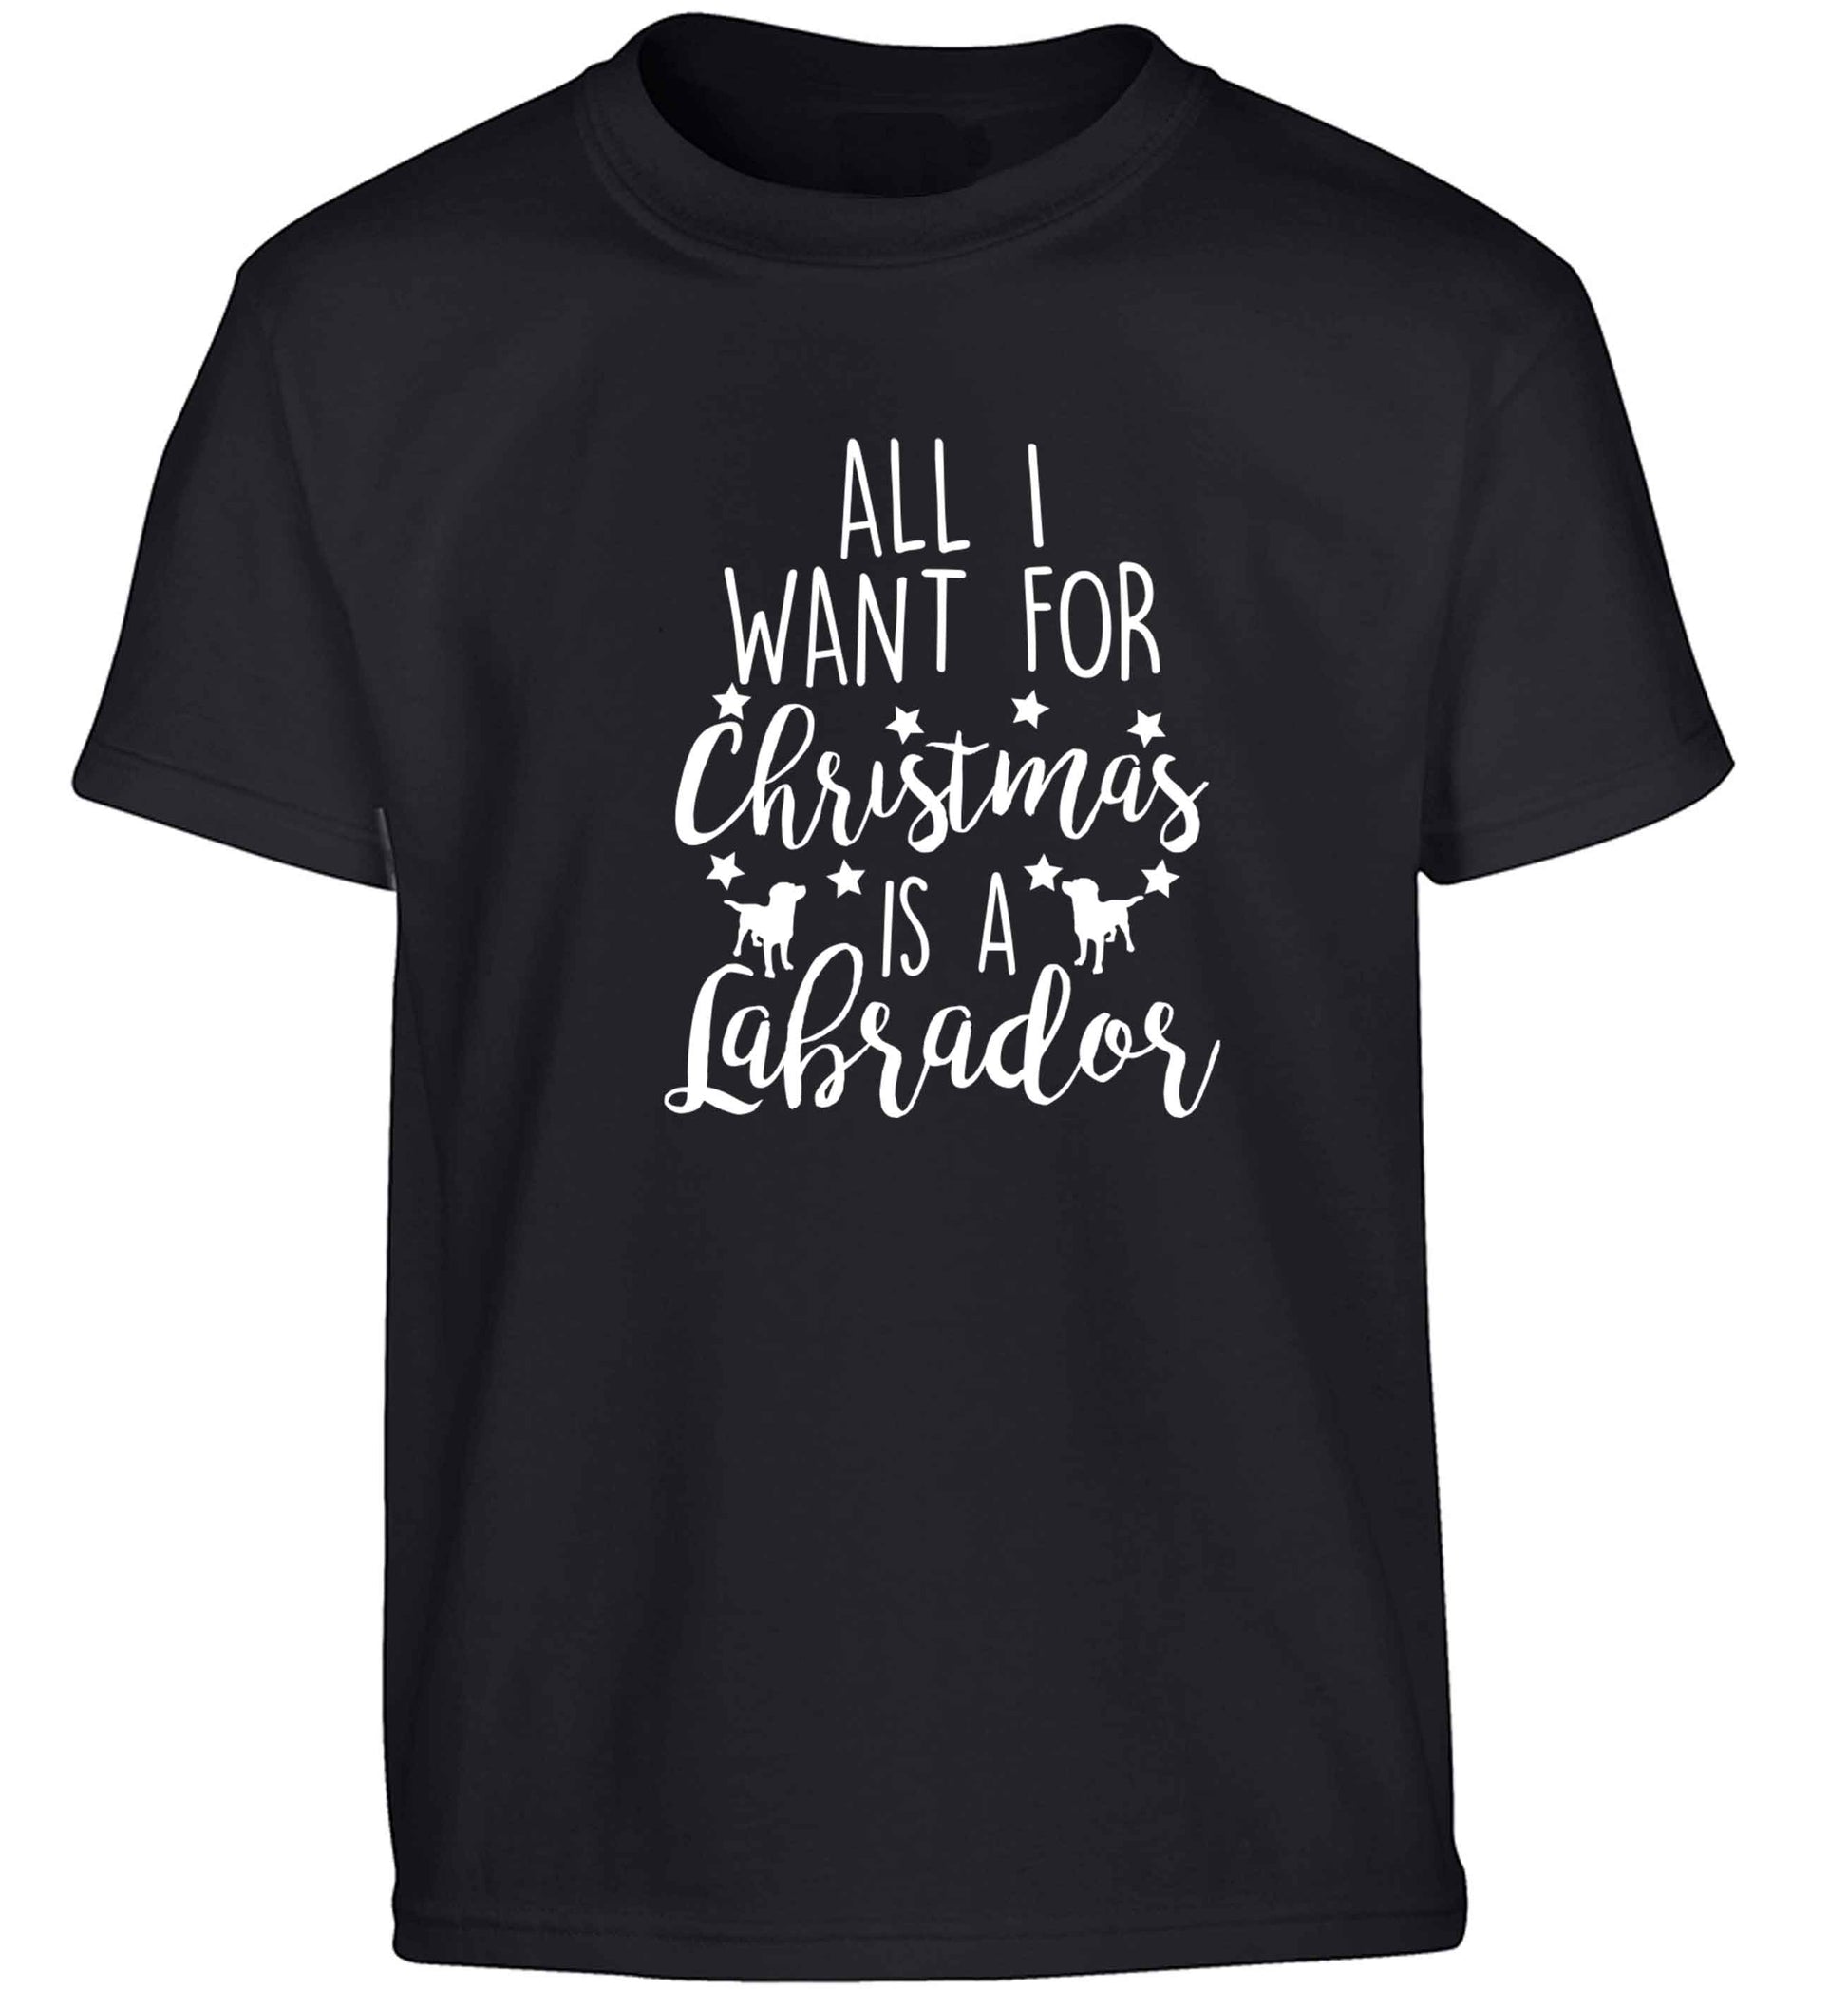 All I want for Christmas is a labrador Children's black Tshirt 12-13 Years